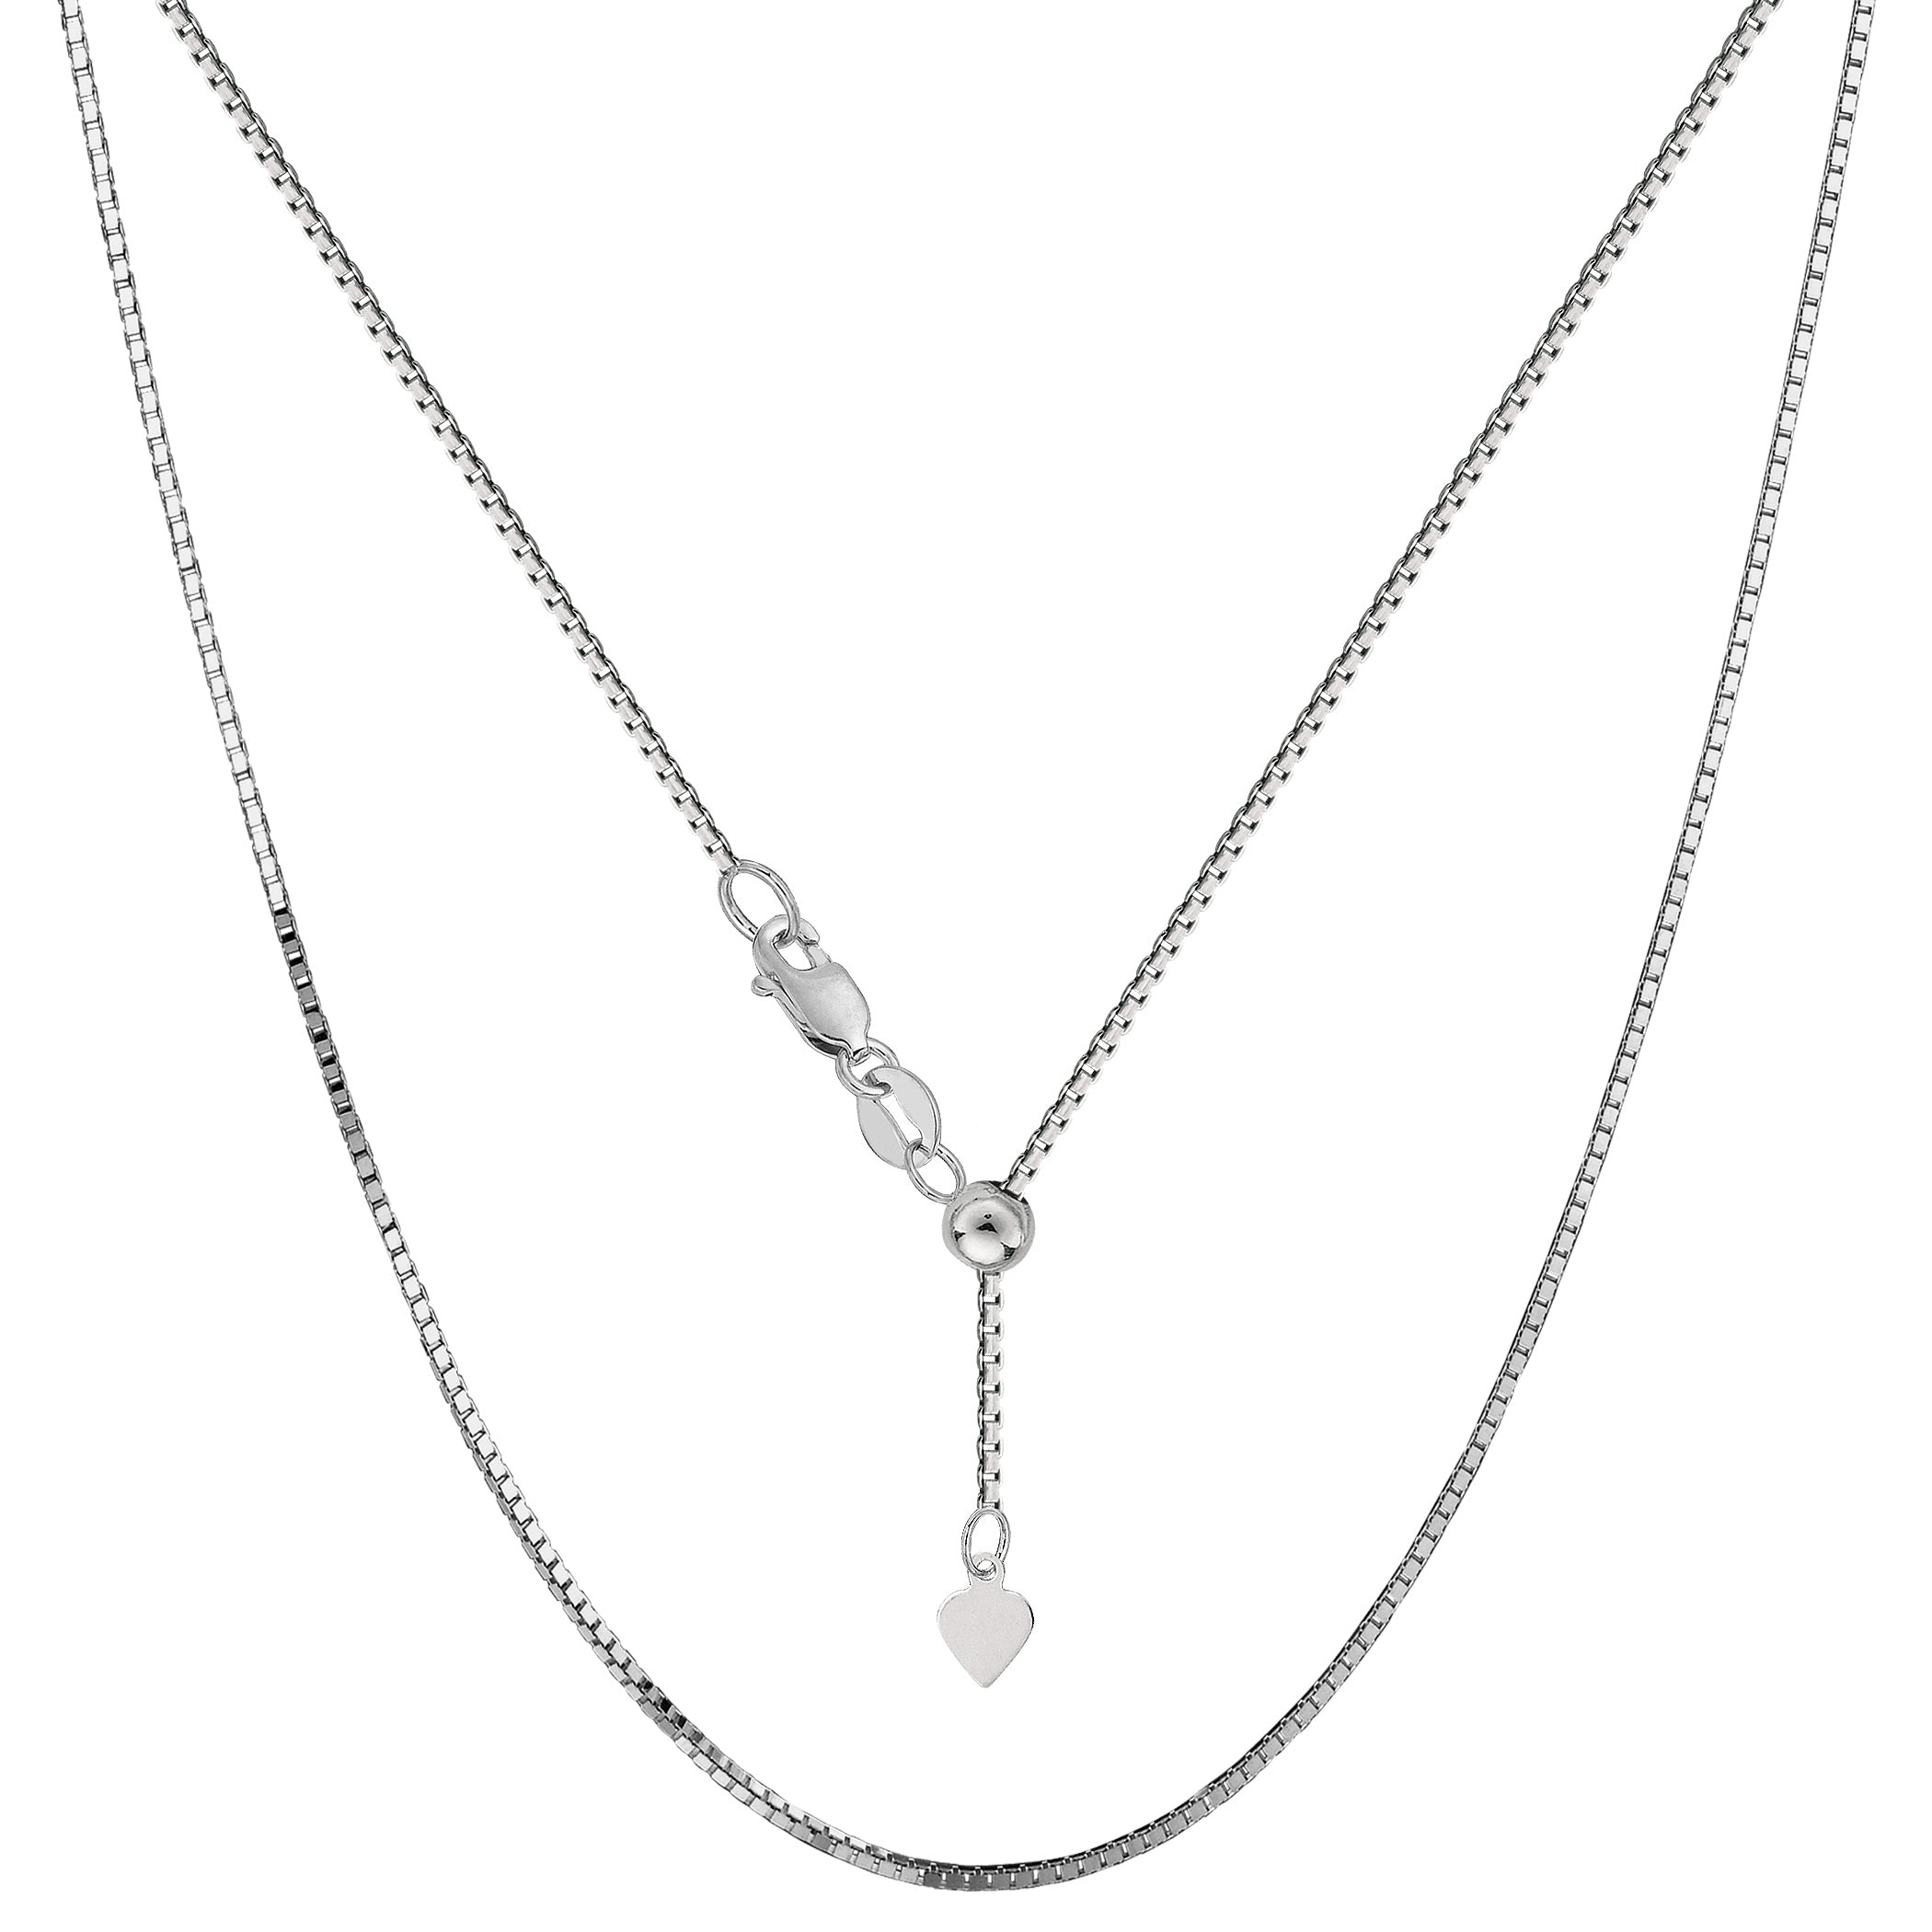 10k White Gold Adjustable Box Link Chain Necklace, 0.85mm, 22" fine designer jewelry for men and women